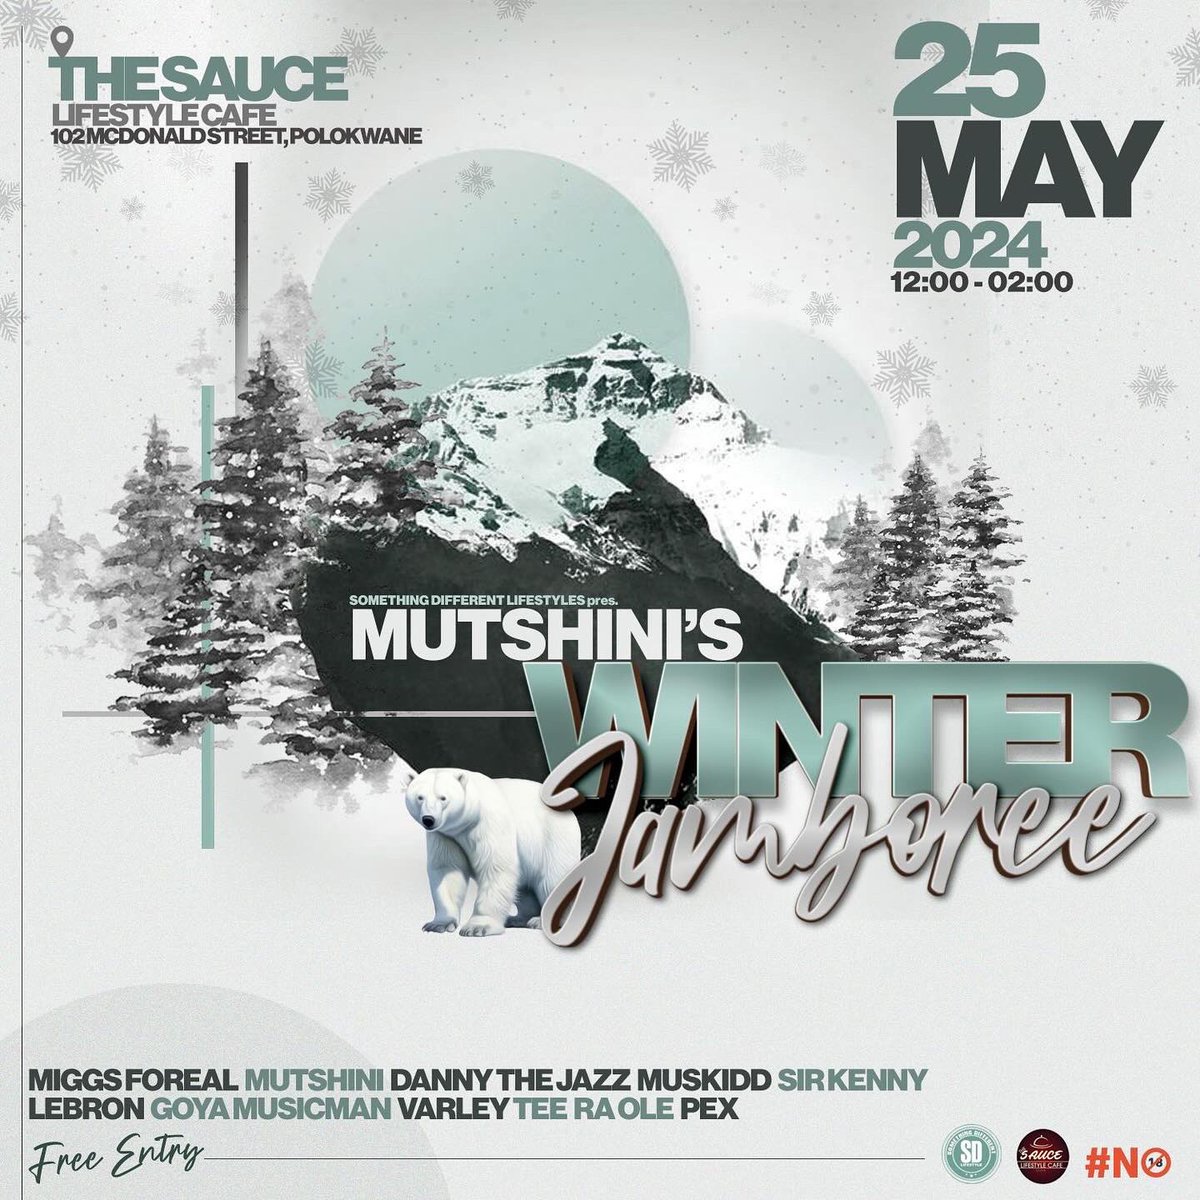 ❄️ Mutshini’s Winter Jamboree ❄️ Get lost in the rhythm of soulful music with us on Saturday, the 25th of May 2024 for our #LapaFridays Featuring: @mutshini @ra_ole_dj @miggsforeal @danny_thejazz @sirkenny @lebron @goyamusicman @varleytechnical @muskidd . . #thesaucelifestyle